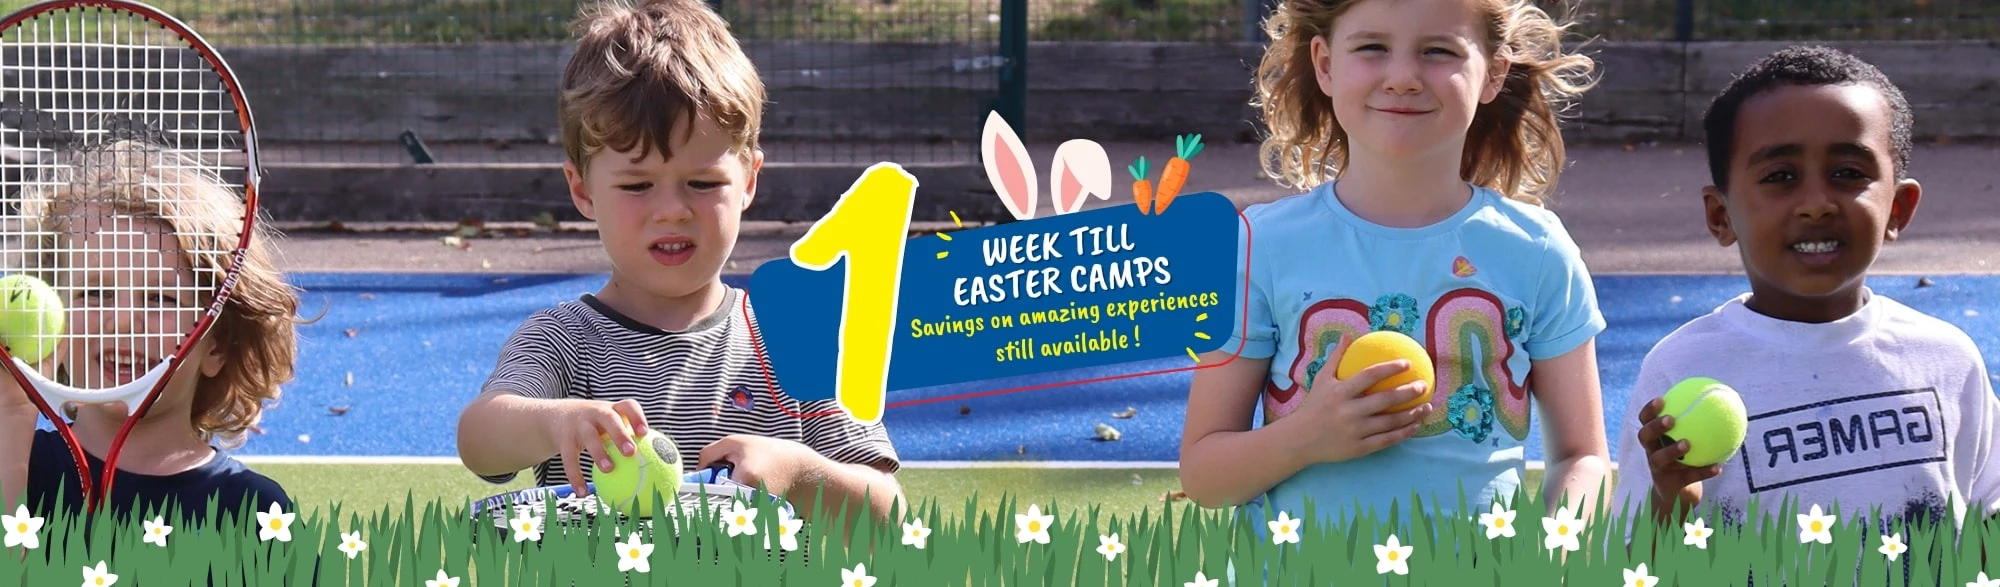 1 week countdown to Easter camps